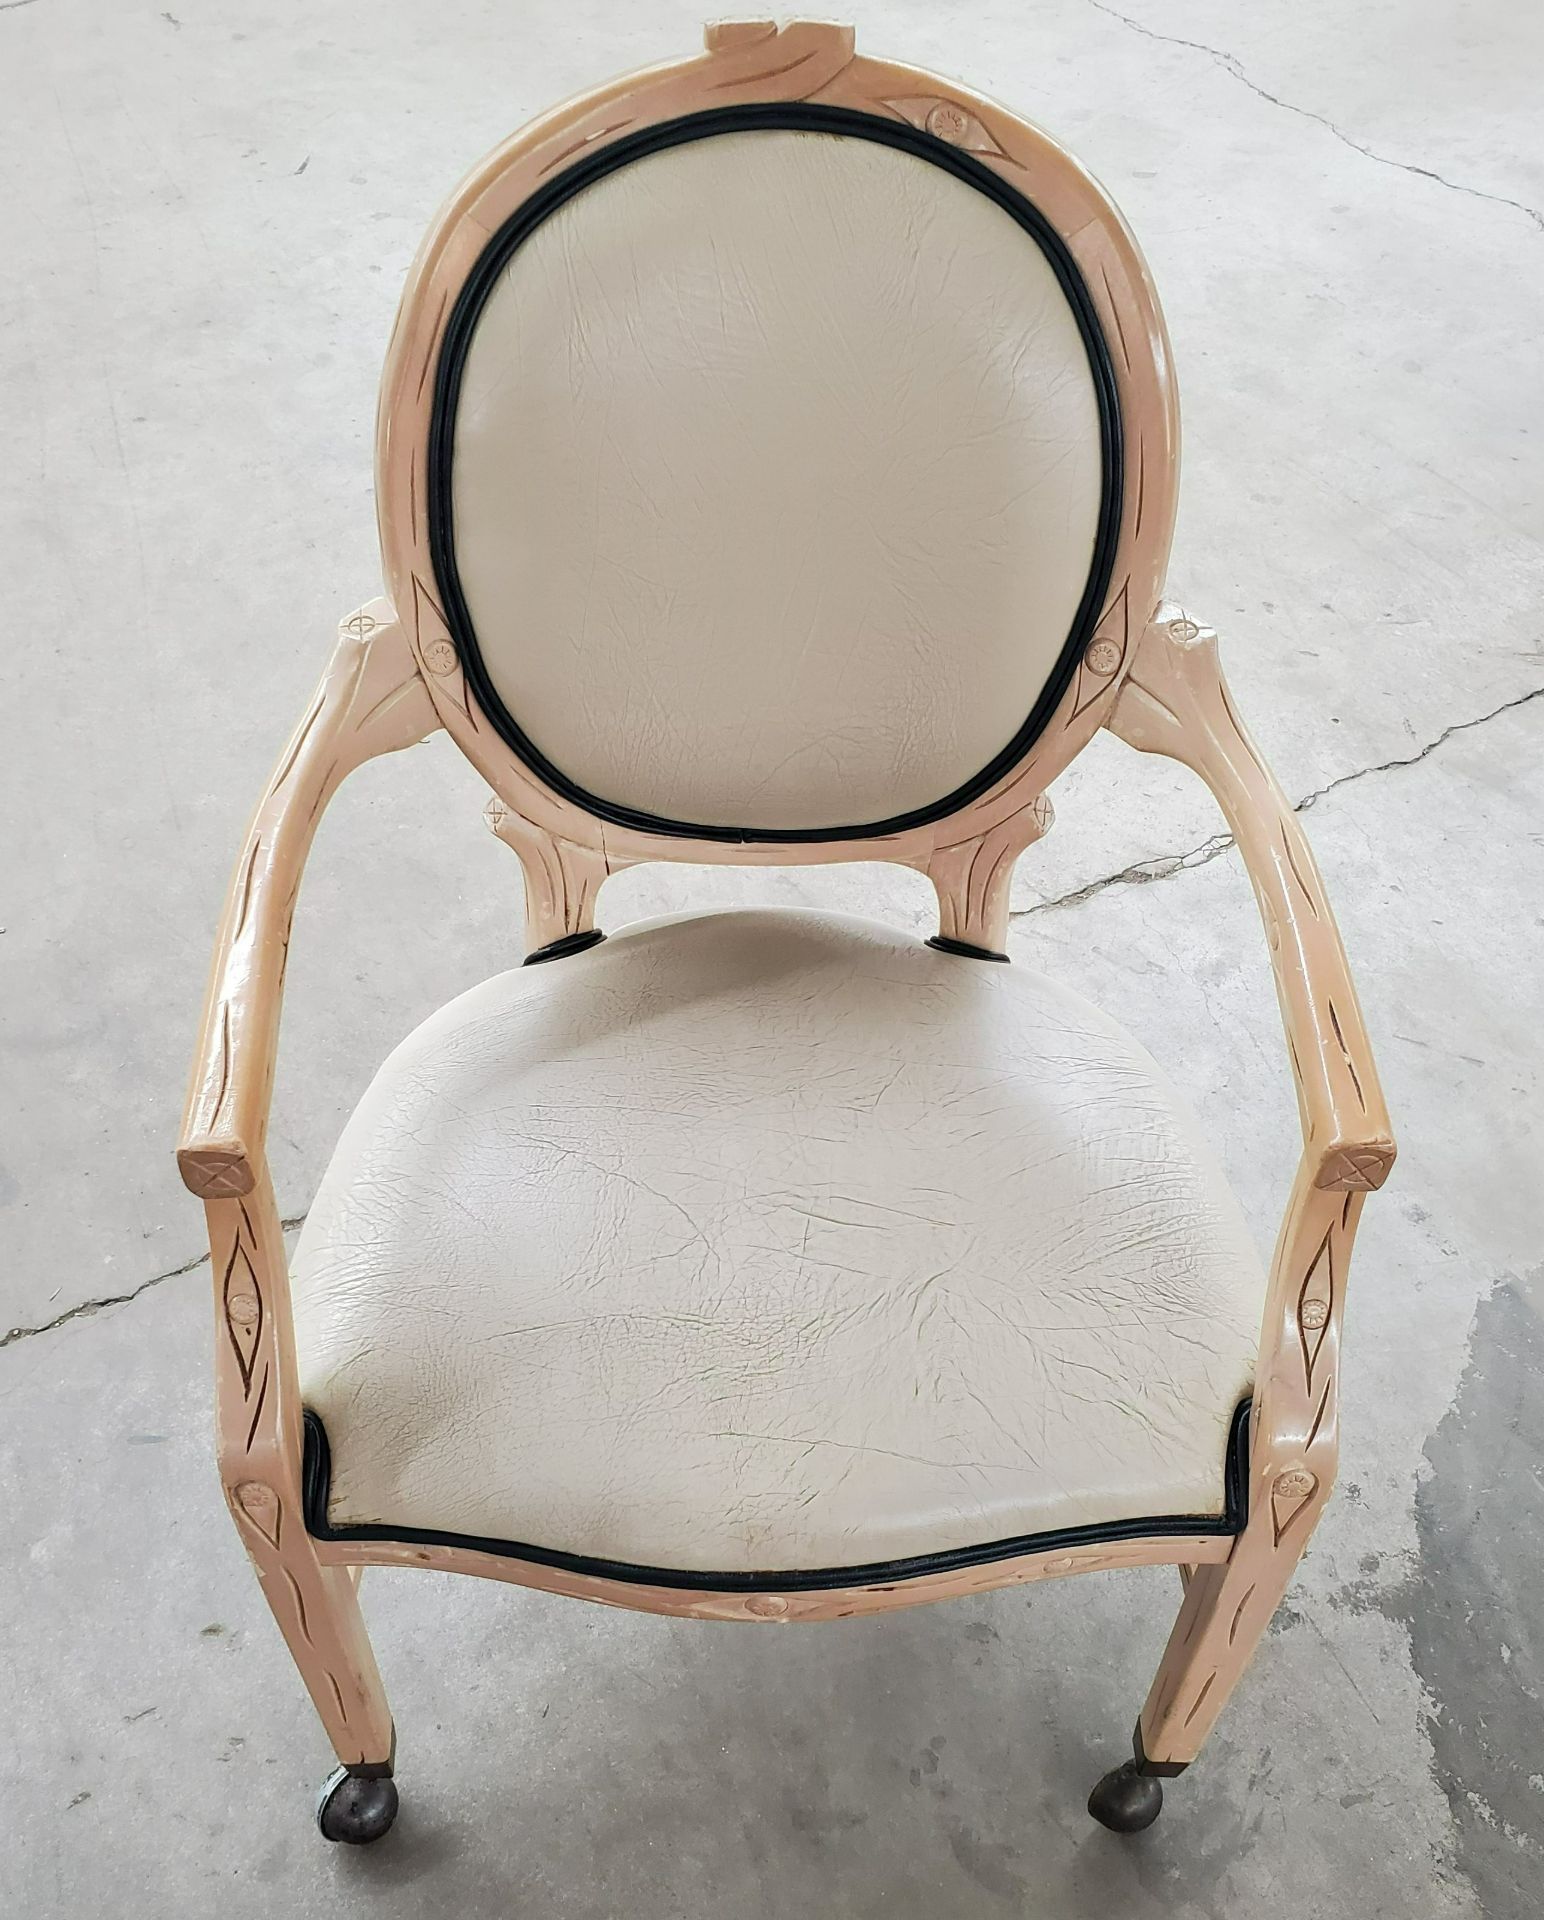 (37x) Dining Chairs w/ Castors on Front Legs